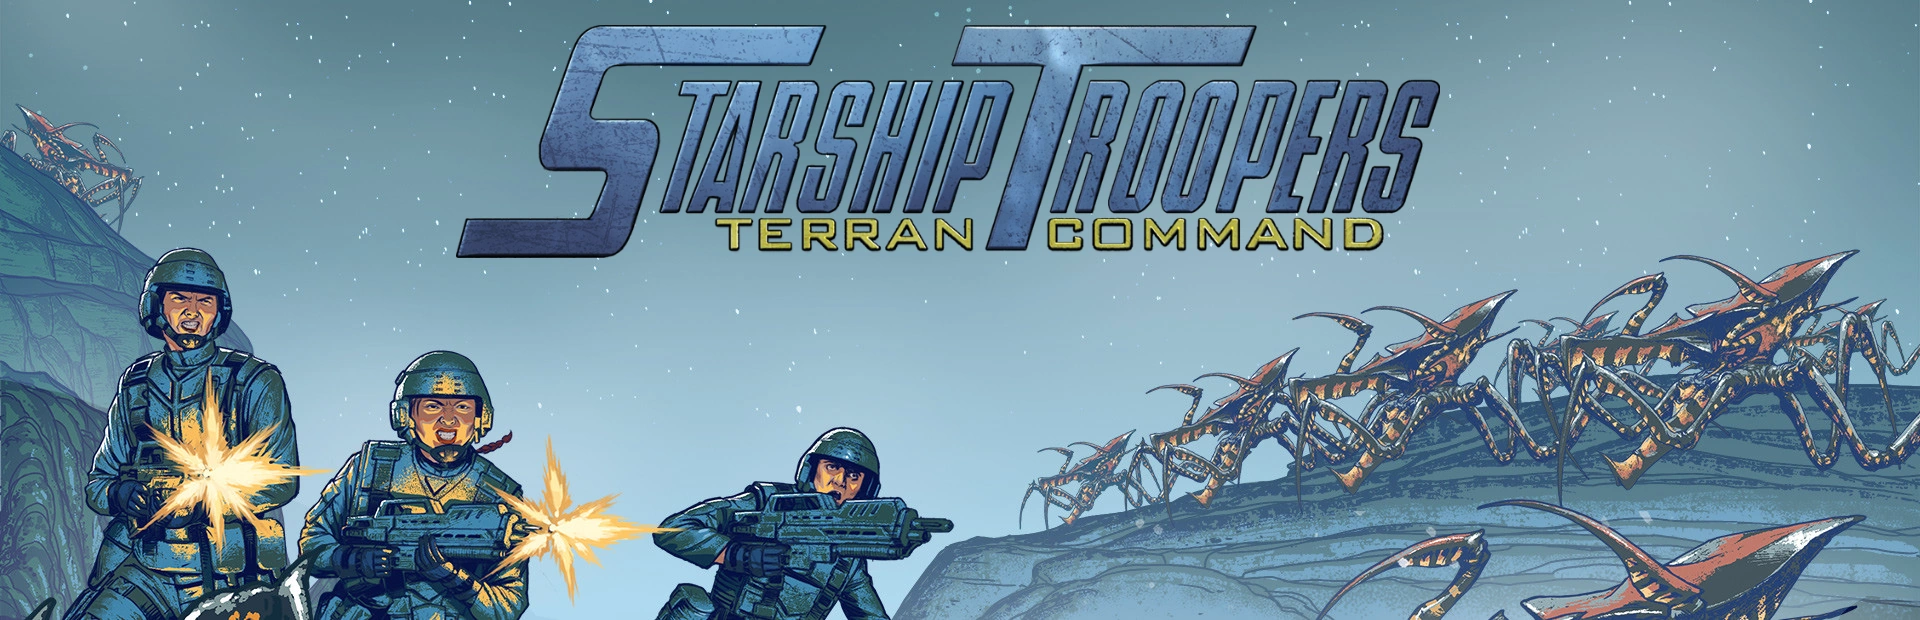 Starship.Troopers Terran.Command.banner3